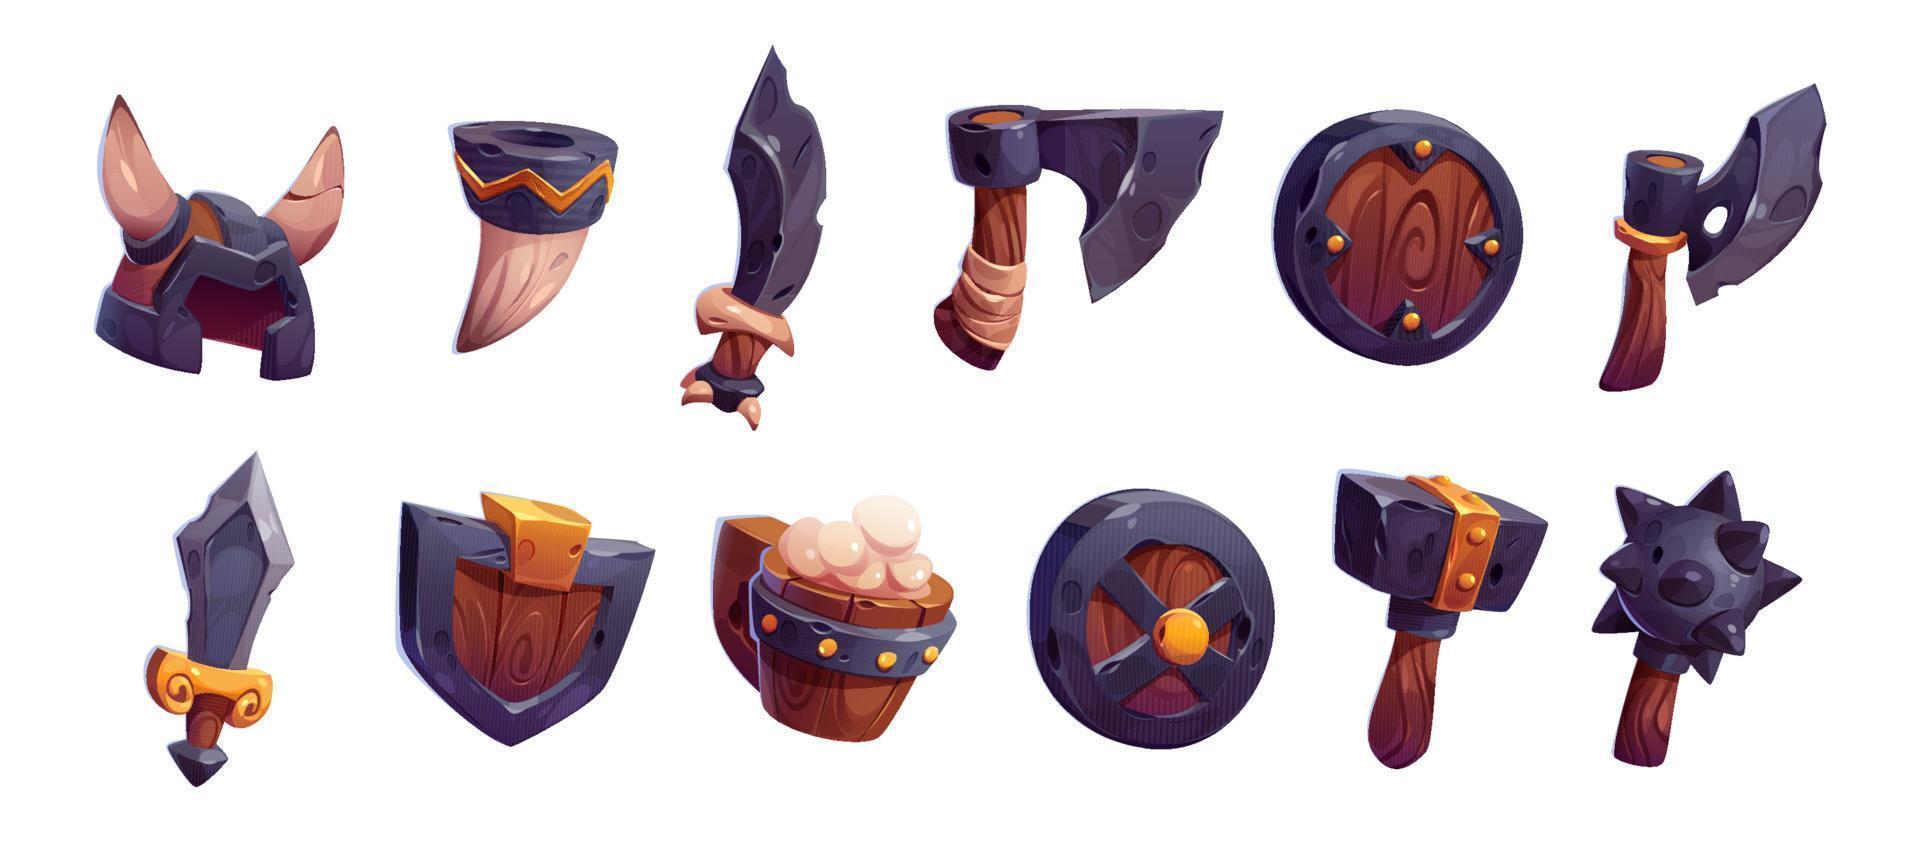 Viking game props icons, ui rpg game design assets vector